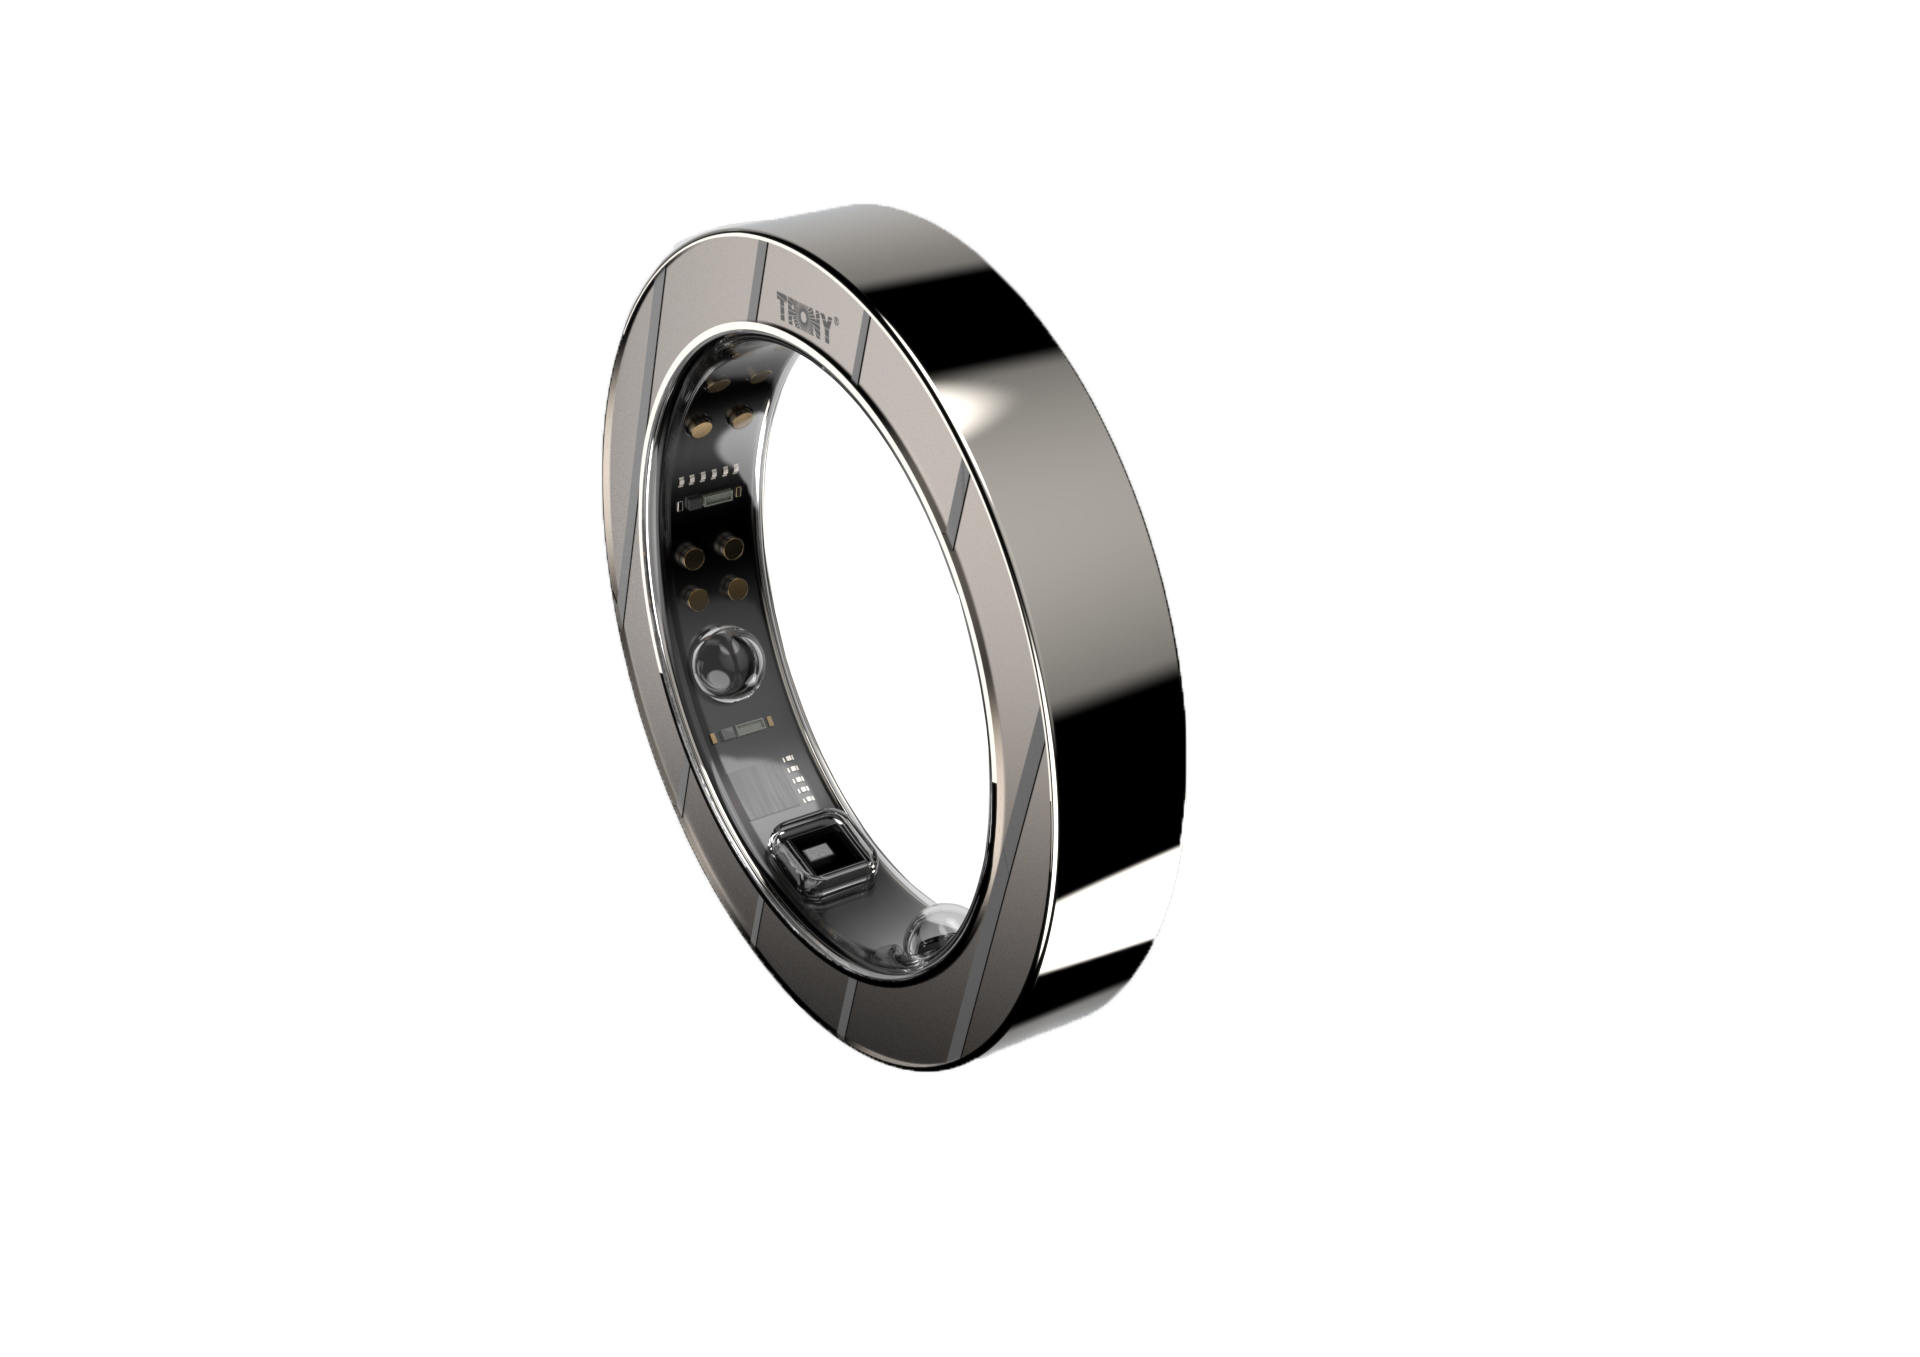 Photovoltaic Smart Ring